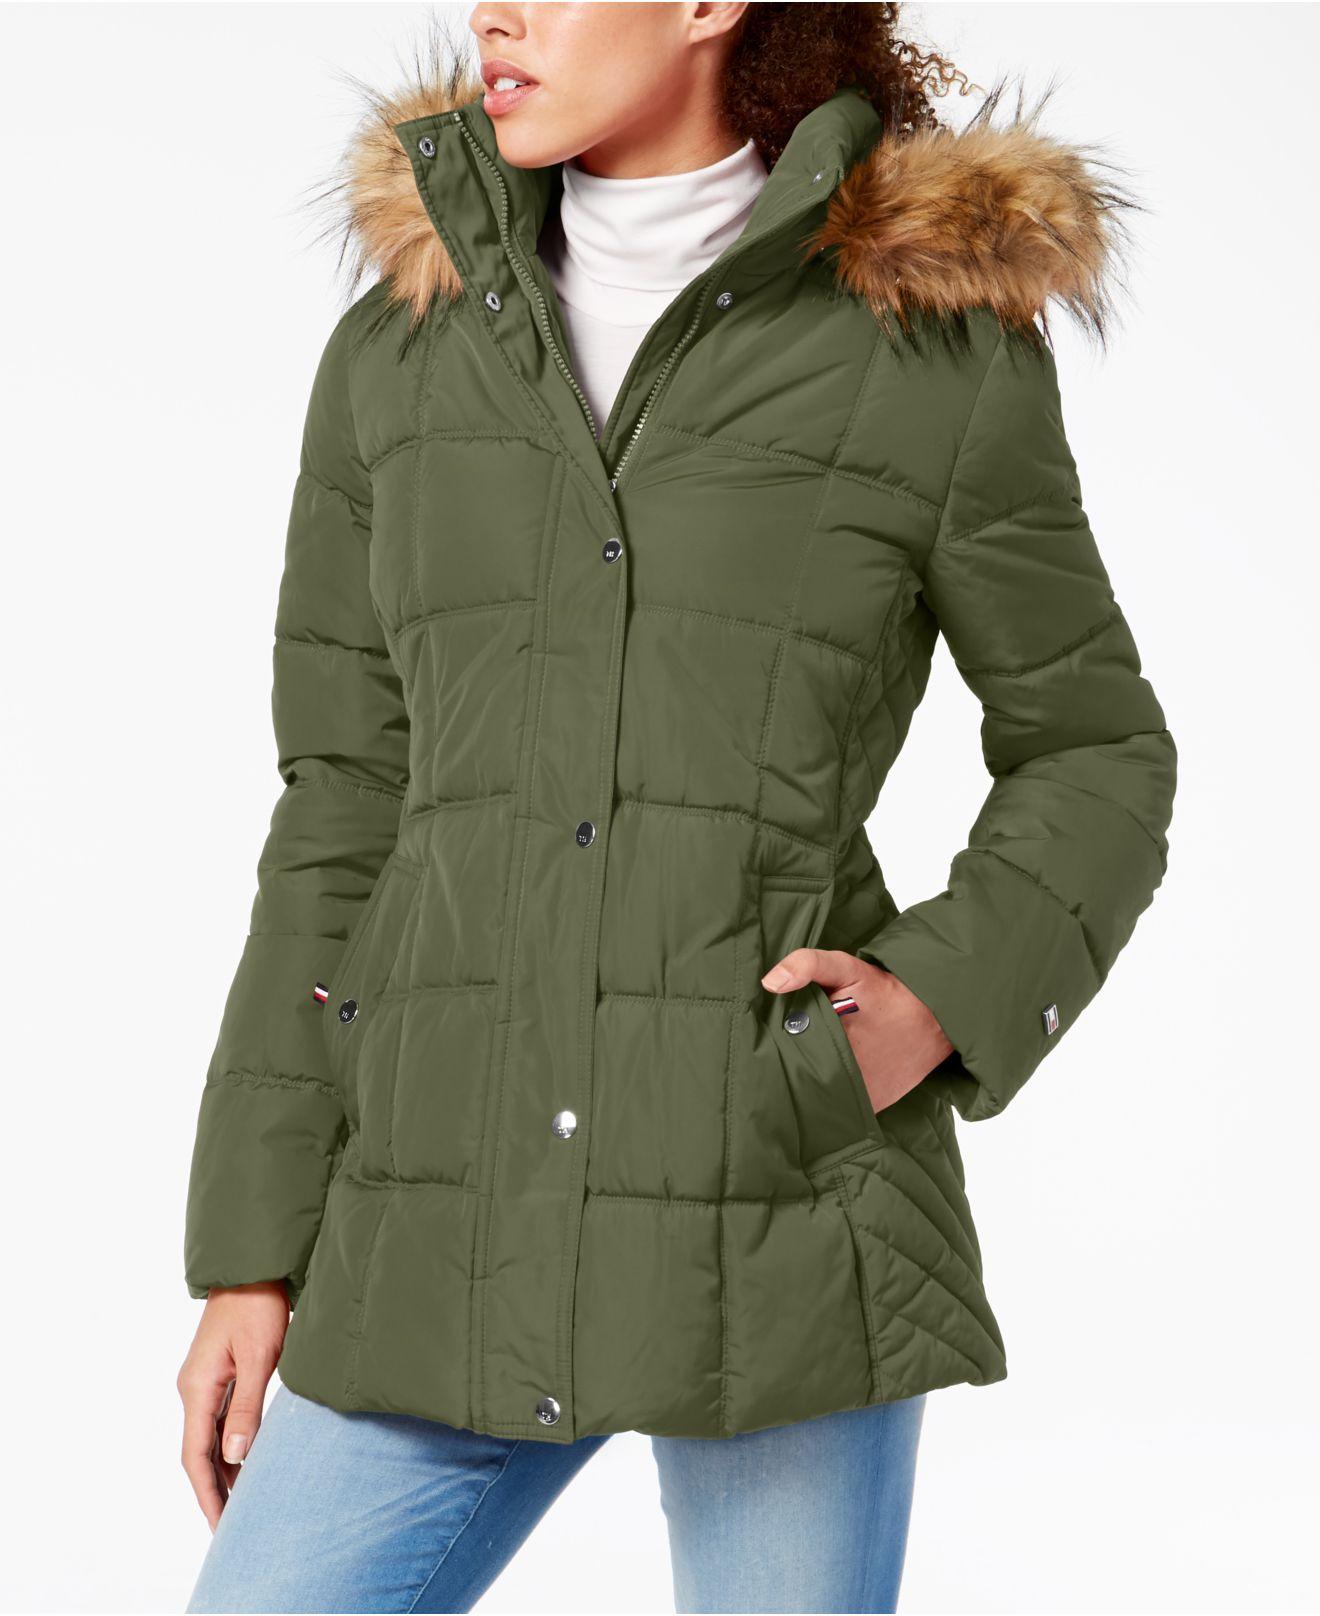 Årvågenhed Anger Flyve drage Tommy Hilfiger Hooded Faux-fur-trim Puffer Coat, Created For Macy's in Army  Green (Green) - Lyst